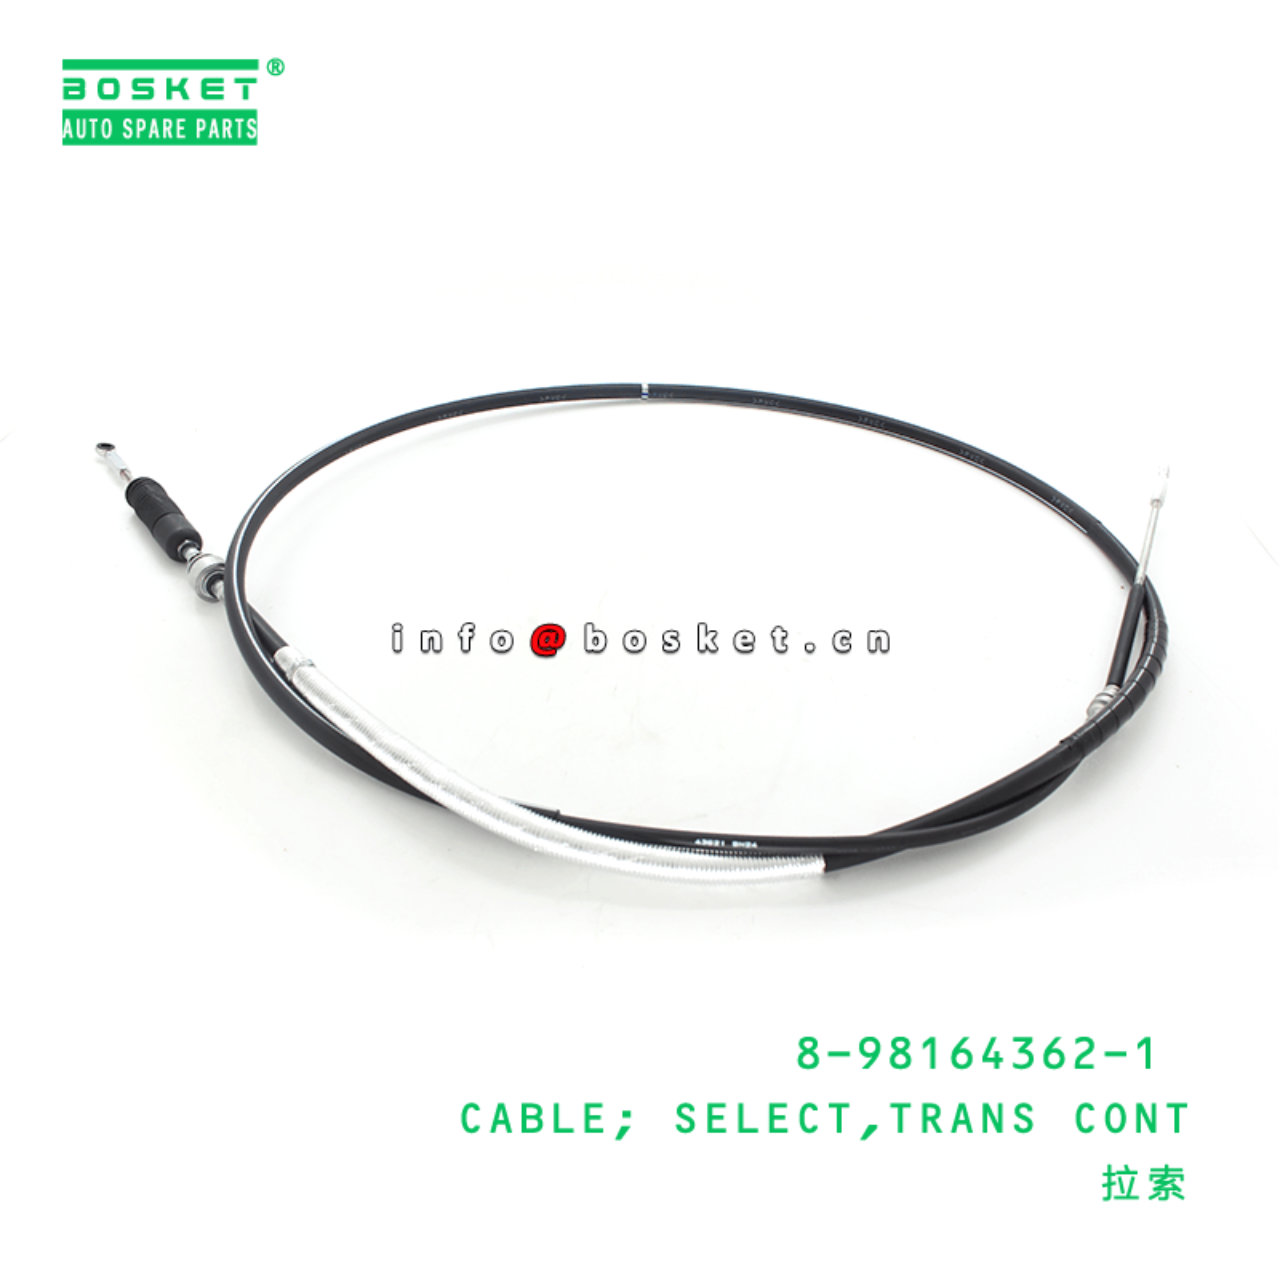 8-98164362-1 8981643621 Transmission Control Select Cable Suitable for ISUZU NMR85